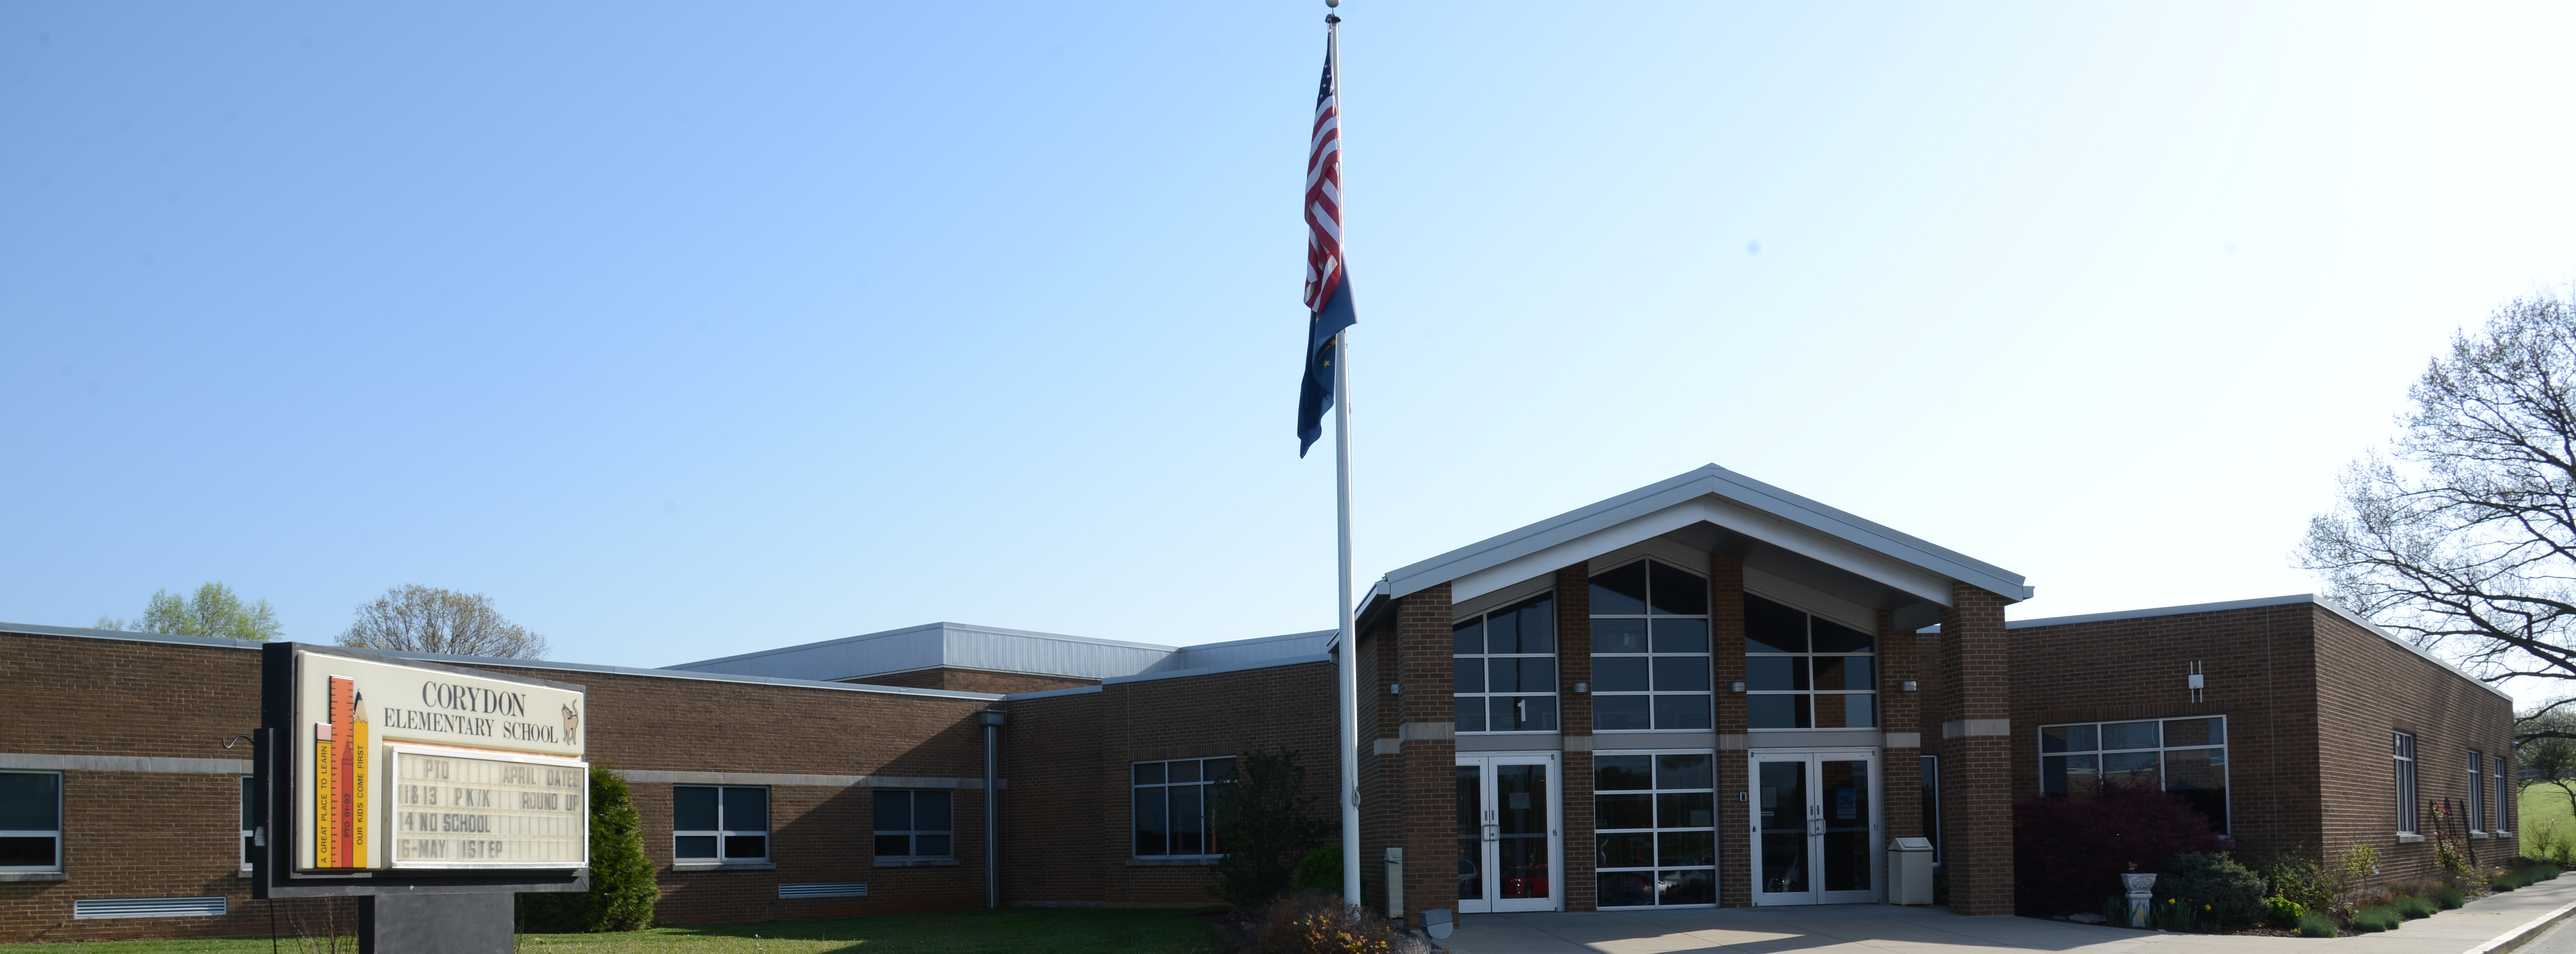 picture of the front of the Corydon Elementary School building